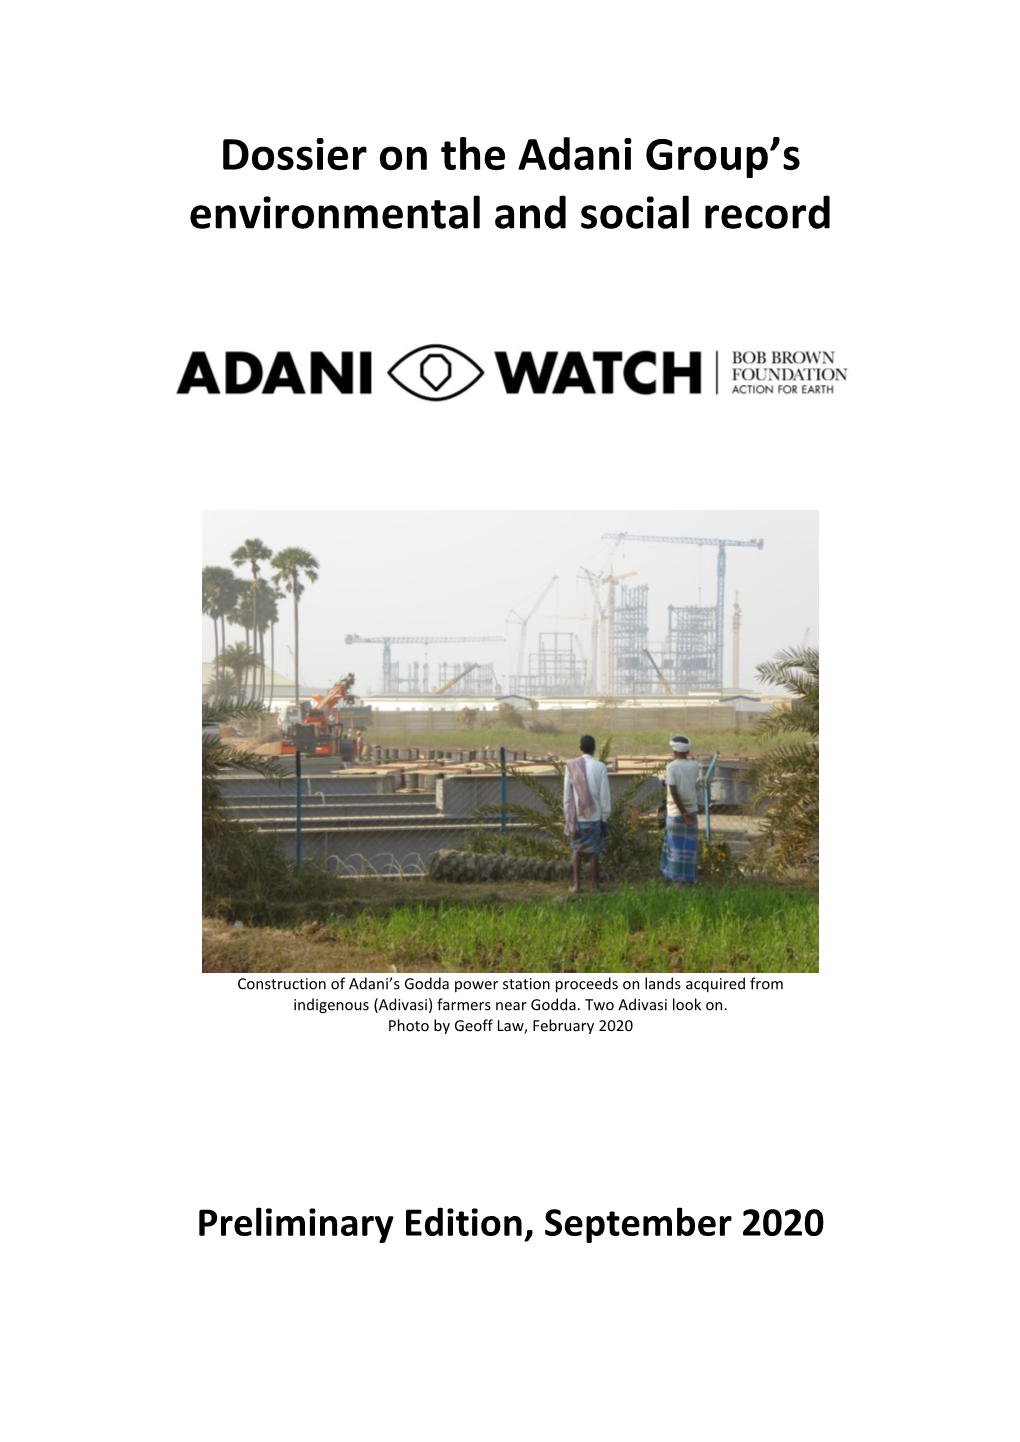 Dossier on the Adani Group's Environmental and Social Record